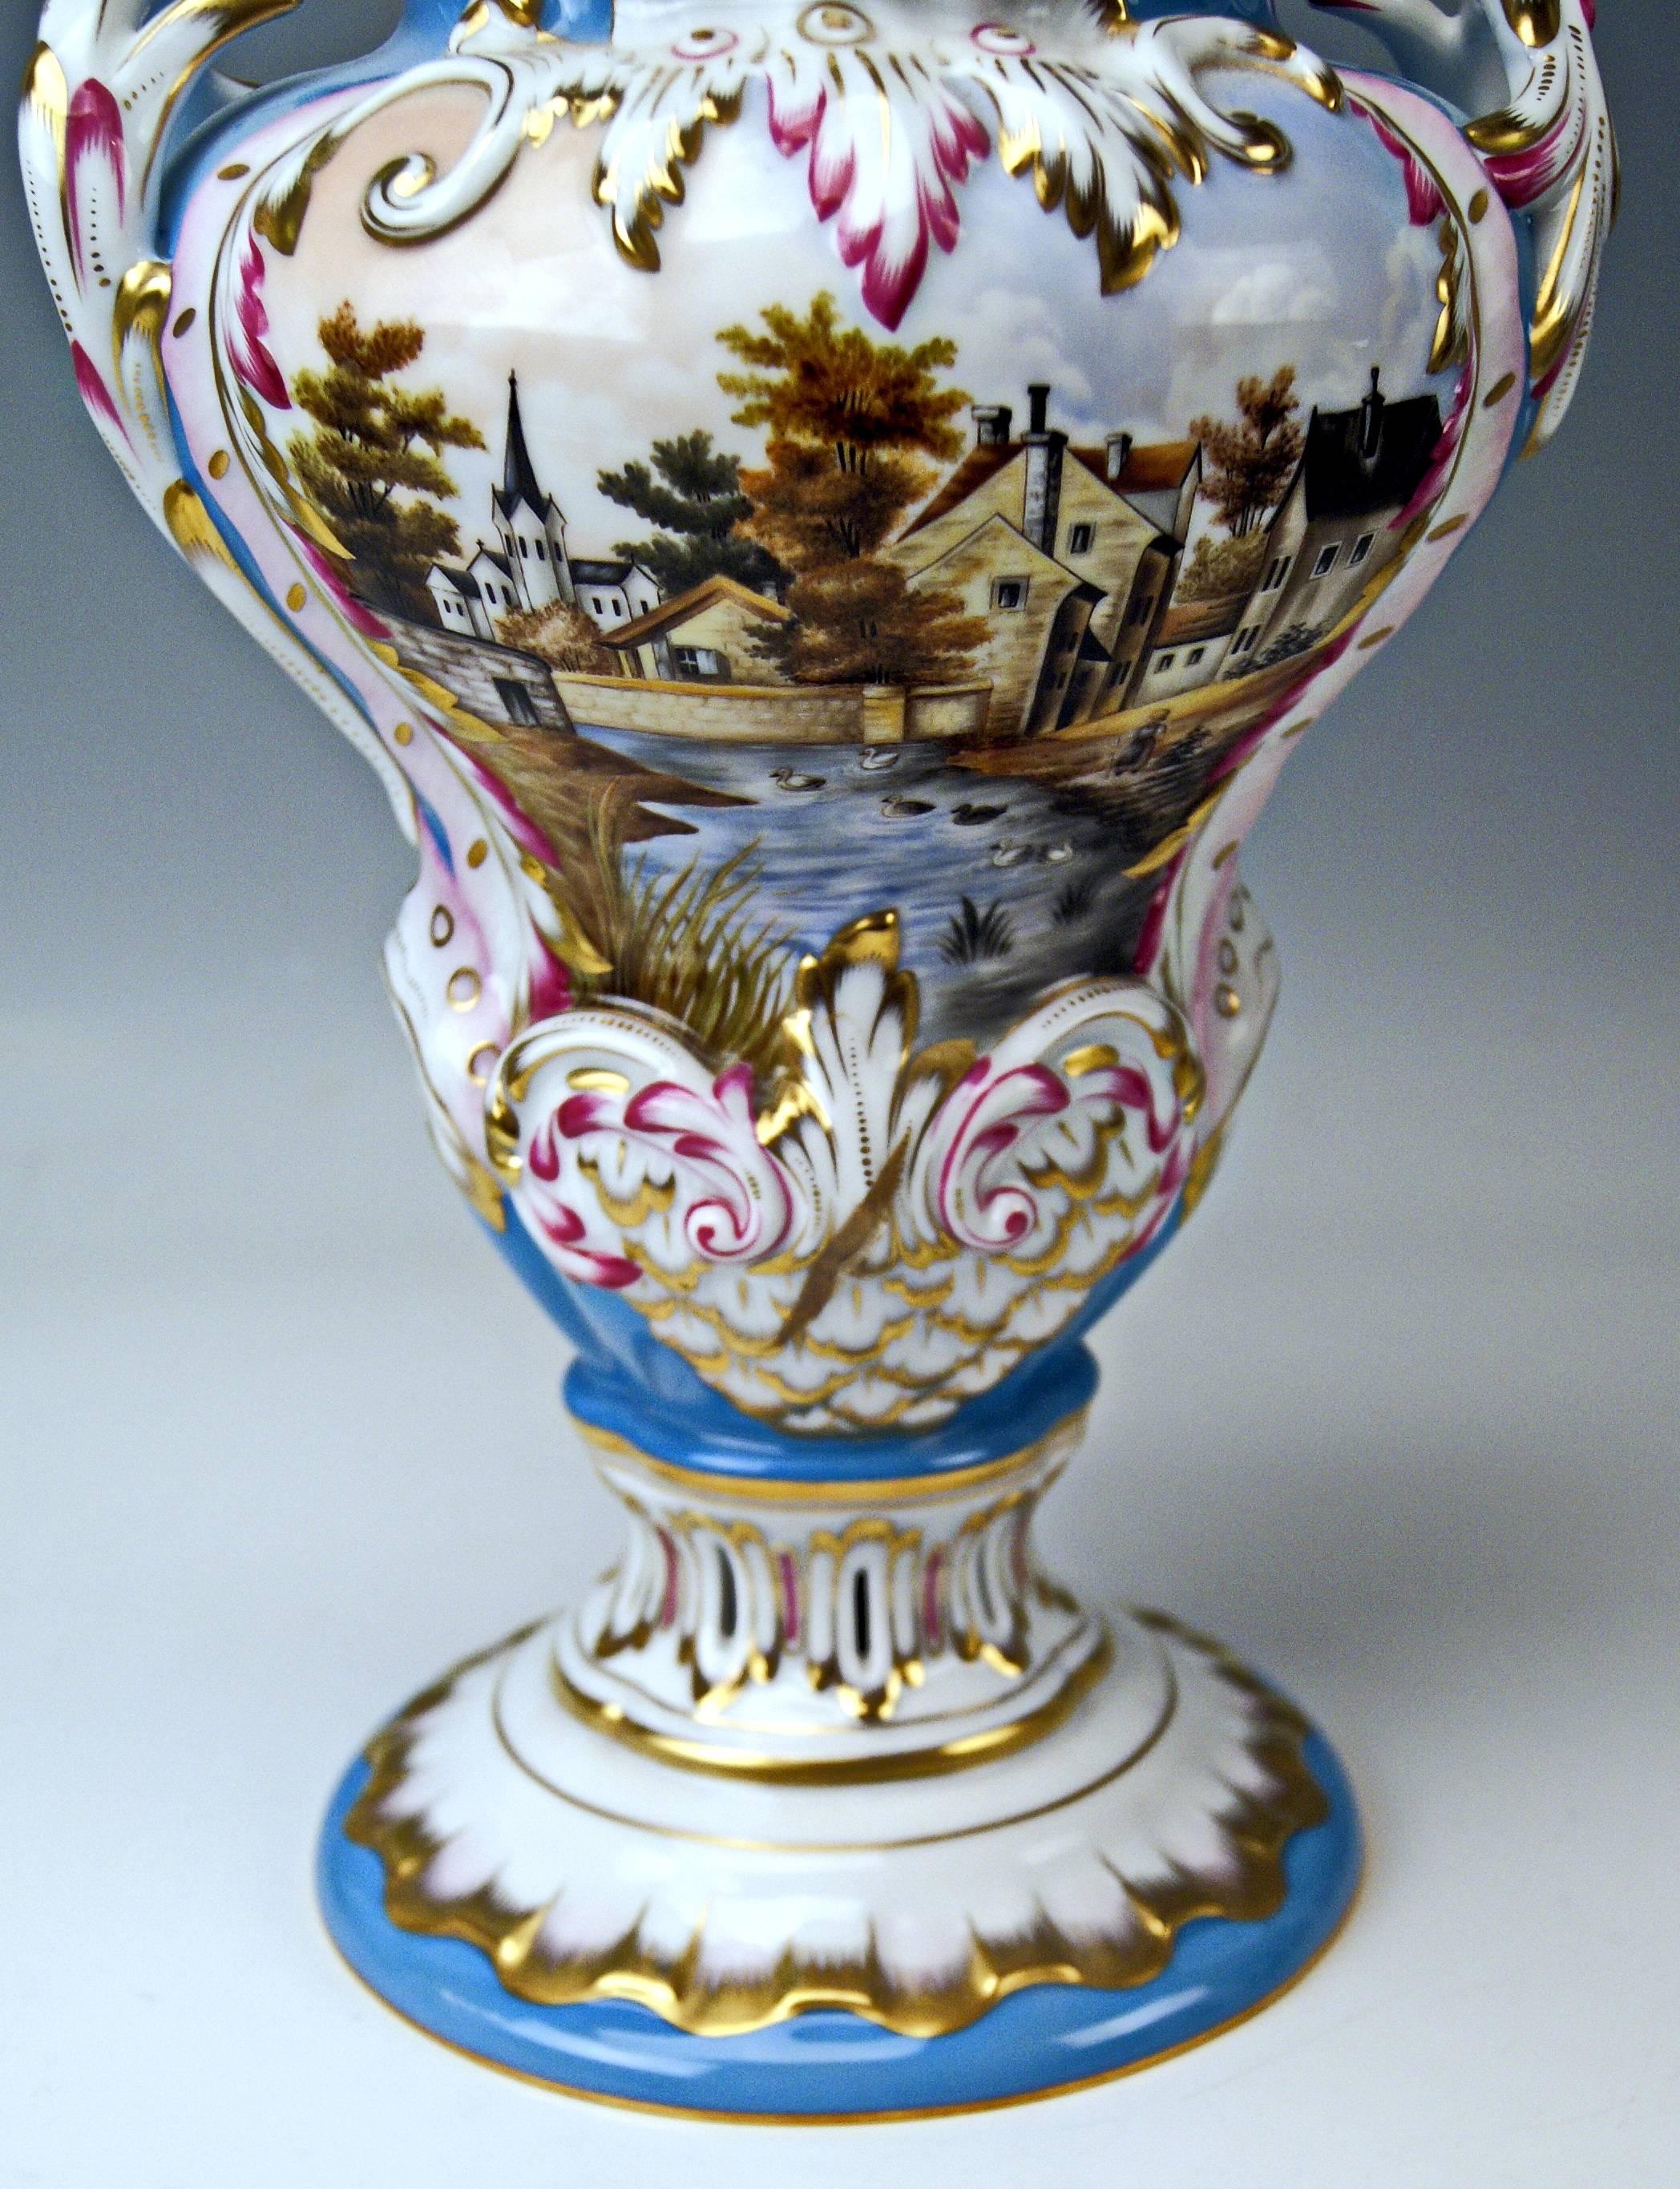 Porcelain Herend Lidded Vase Picture Paintings by Istvan Lazar (1993), Height:14.76 inches